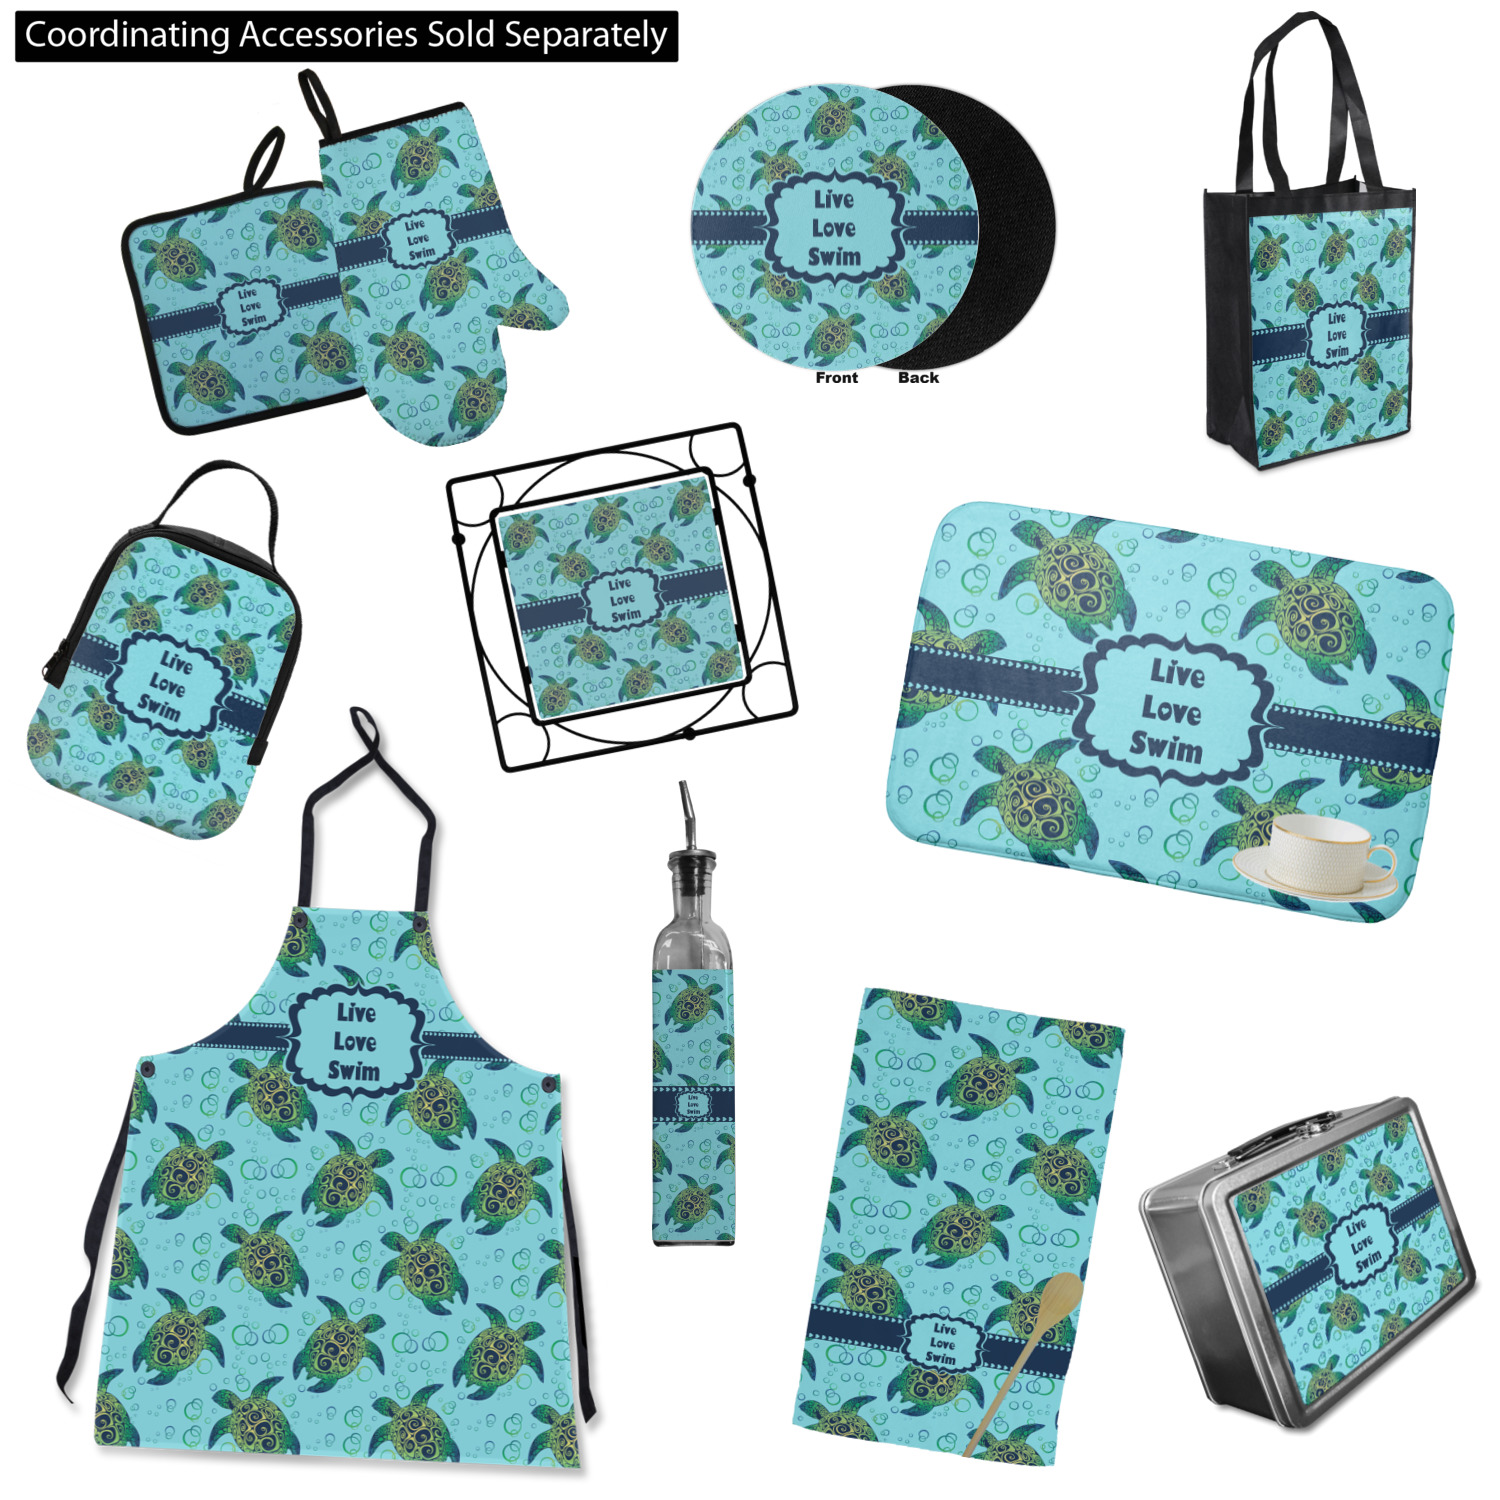 VP Home Tribal Turtles Insulated Neoprene Lunch Tote Bag 